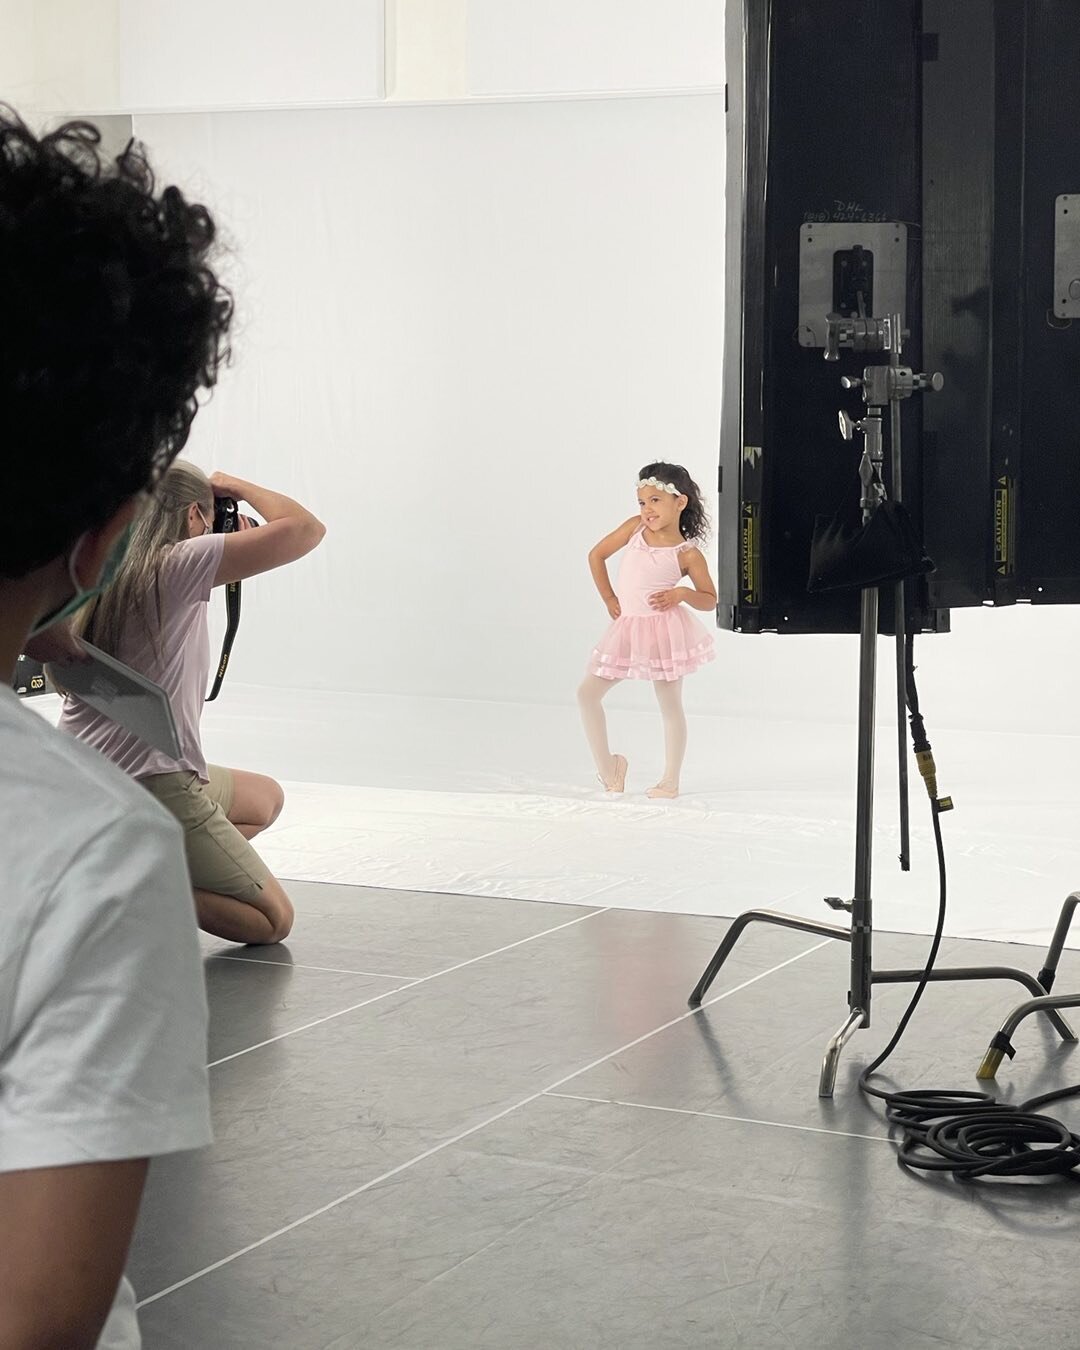 Sky is loving this! Photos for Ballet class.